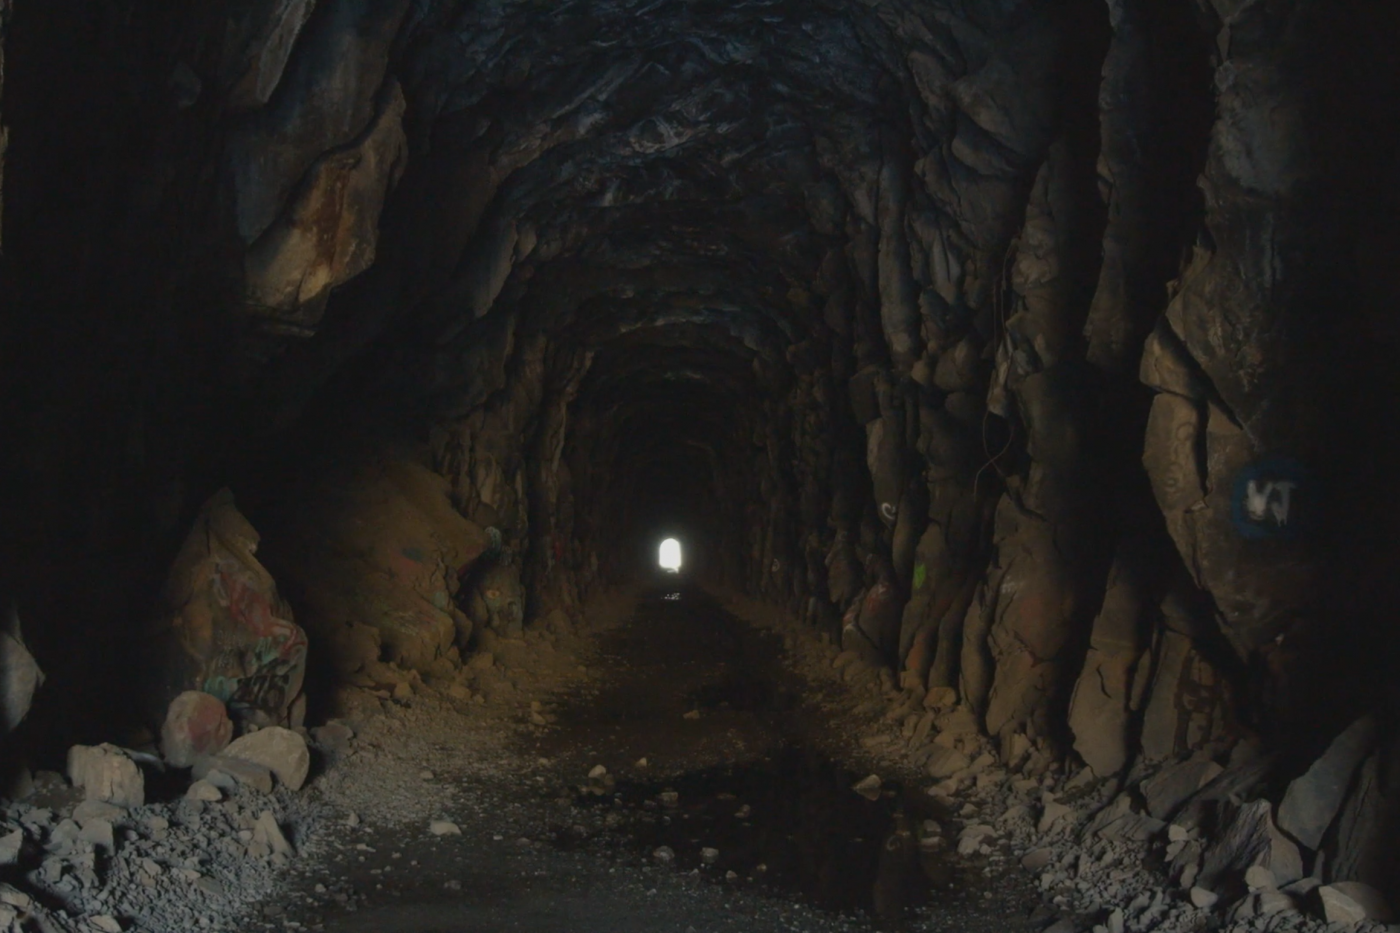 A long narrow tunnel within a rock formation. At the end of the tunnel is an opening shaped like a beam of light.